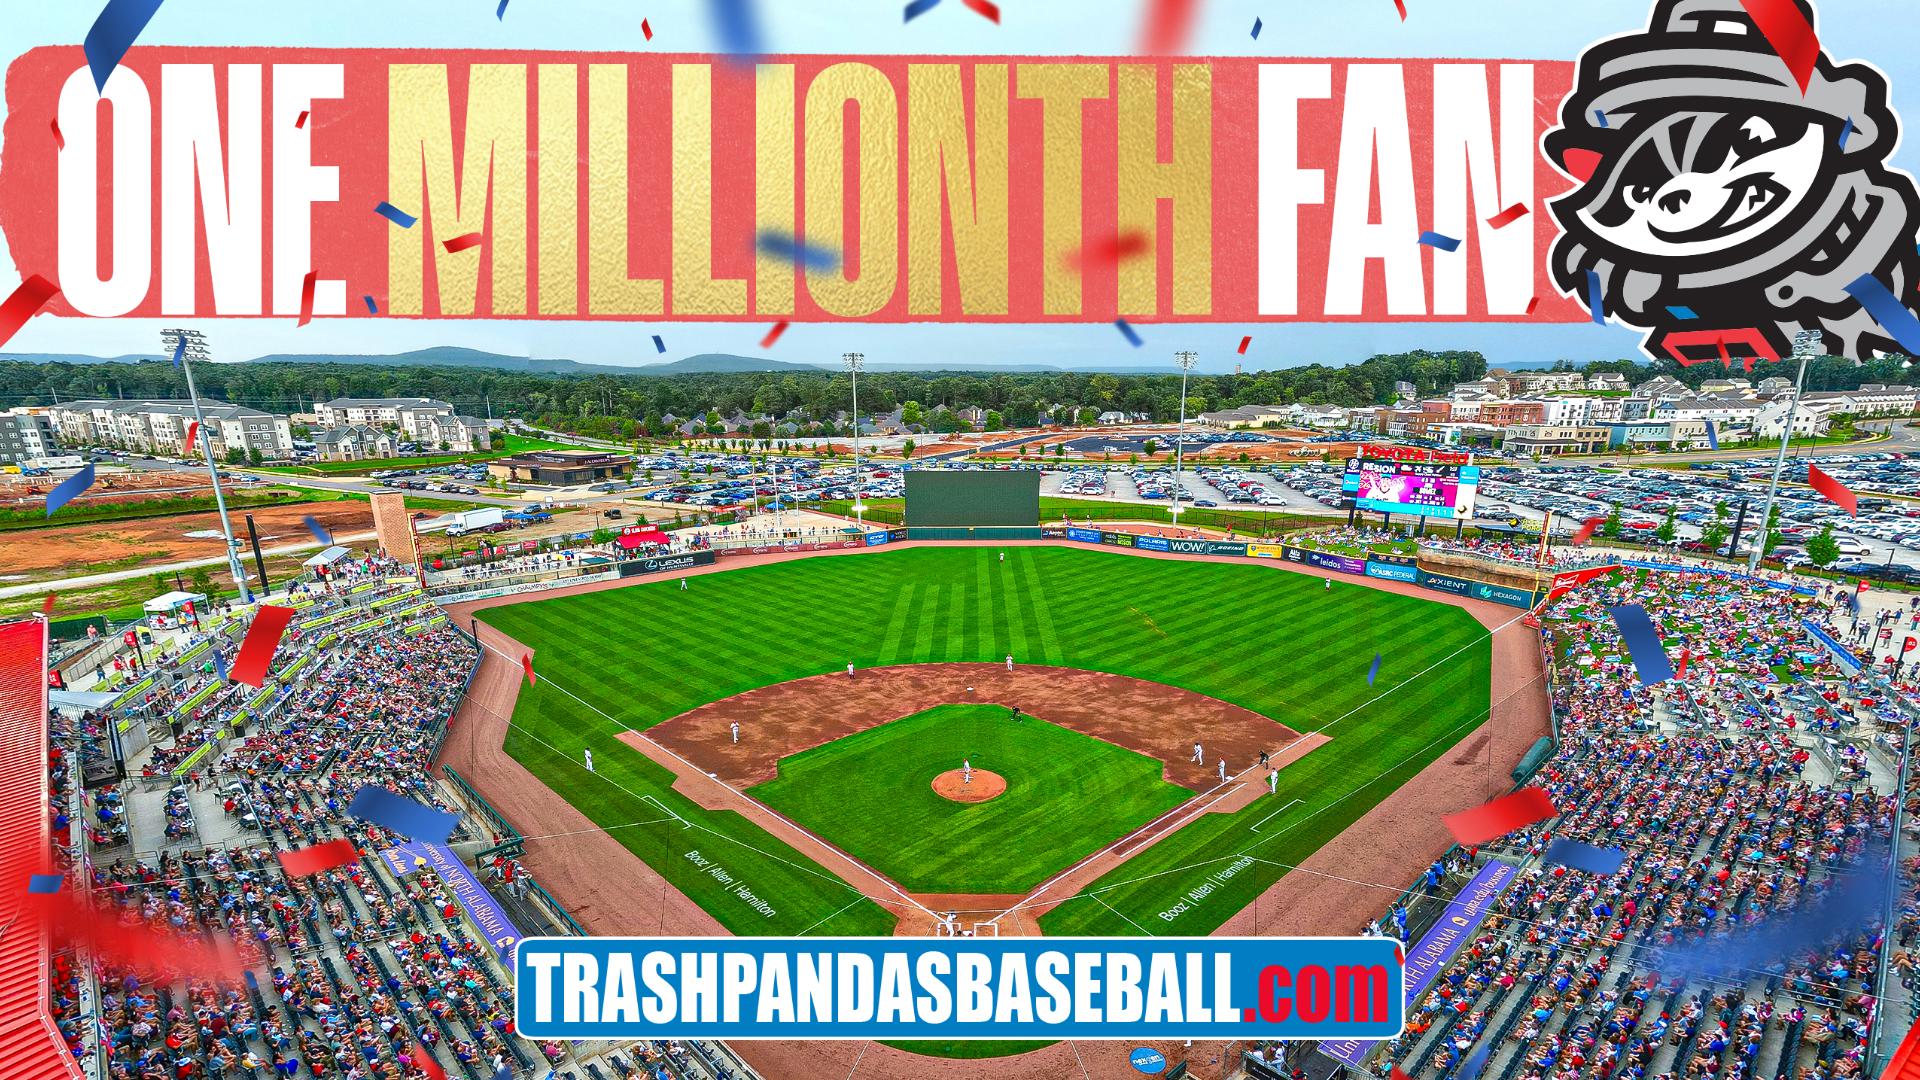 A customized jersey, $200 Trash Cash, a ceremonial First Pitch, a Golden Ticket, box seats, and more await the millionth fan to visit the Rocket City Trash Pandas.